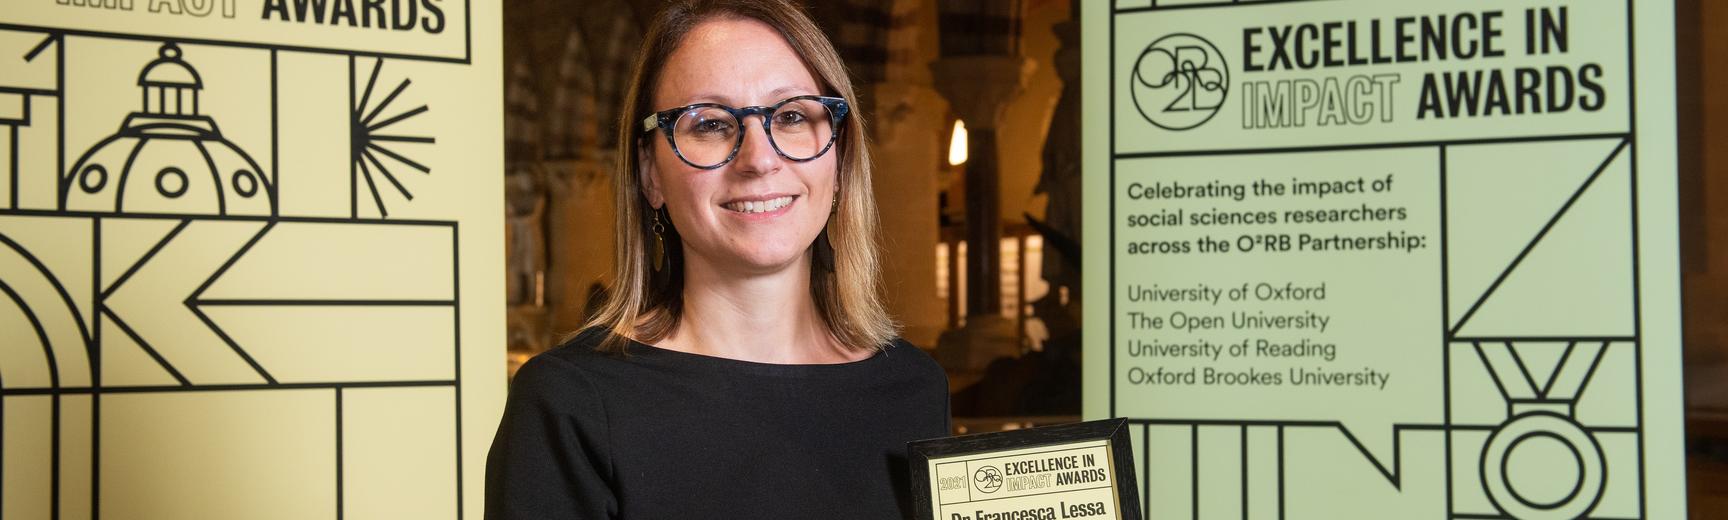 Dr Francesca Lessa holds her Excellence in Impact Awards Highly Commended certificate at the Awards reception evening, flanked by pull-up banners of the awards branding. In the background are the arches of the Museum of Natural History. The banners read: 